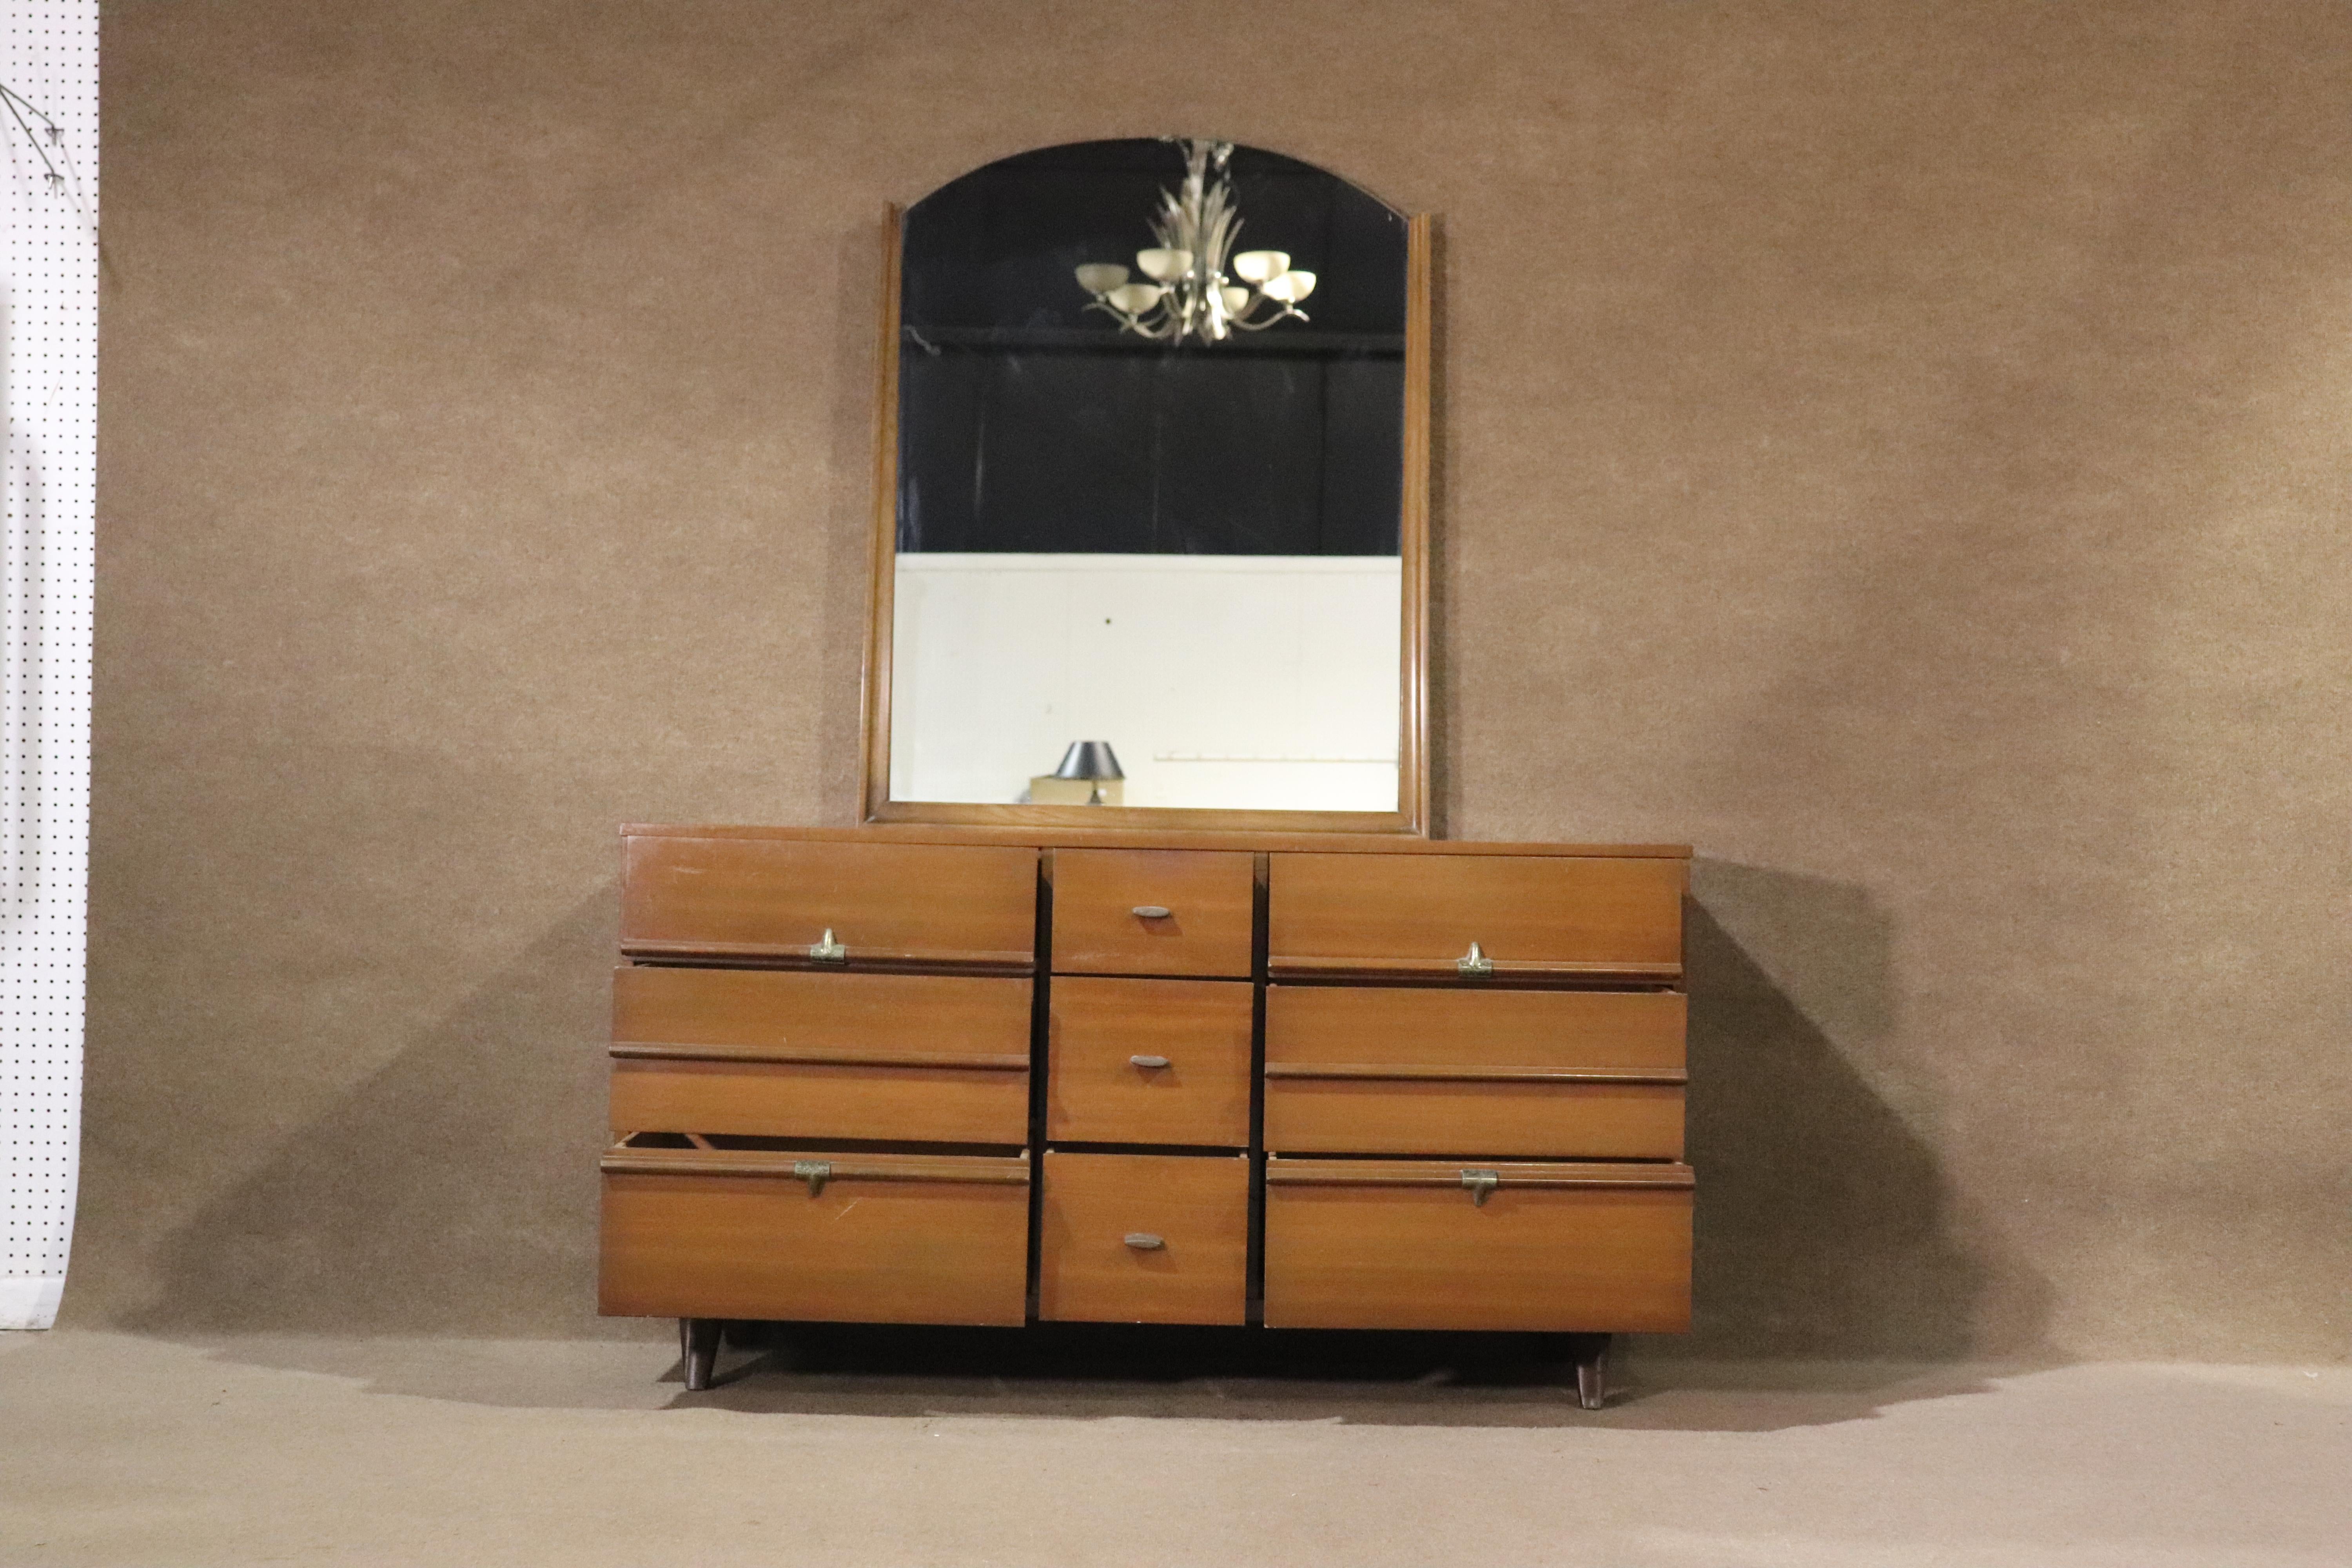 Long mid-century walnut dresser with wall mirror. Nine drawers with metal hardware.
Mirror: 55h, 33w
Please confirm location NY or NJ